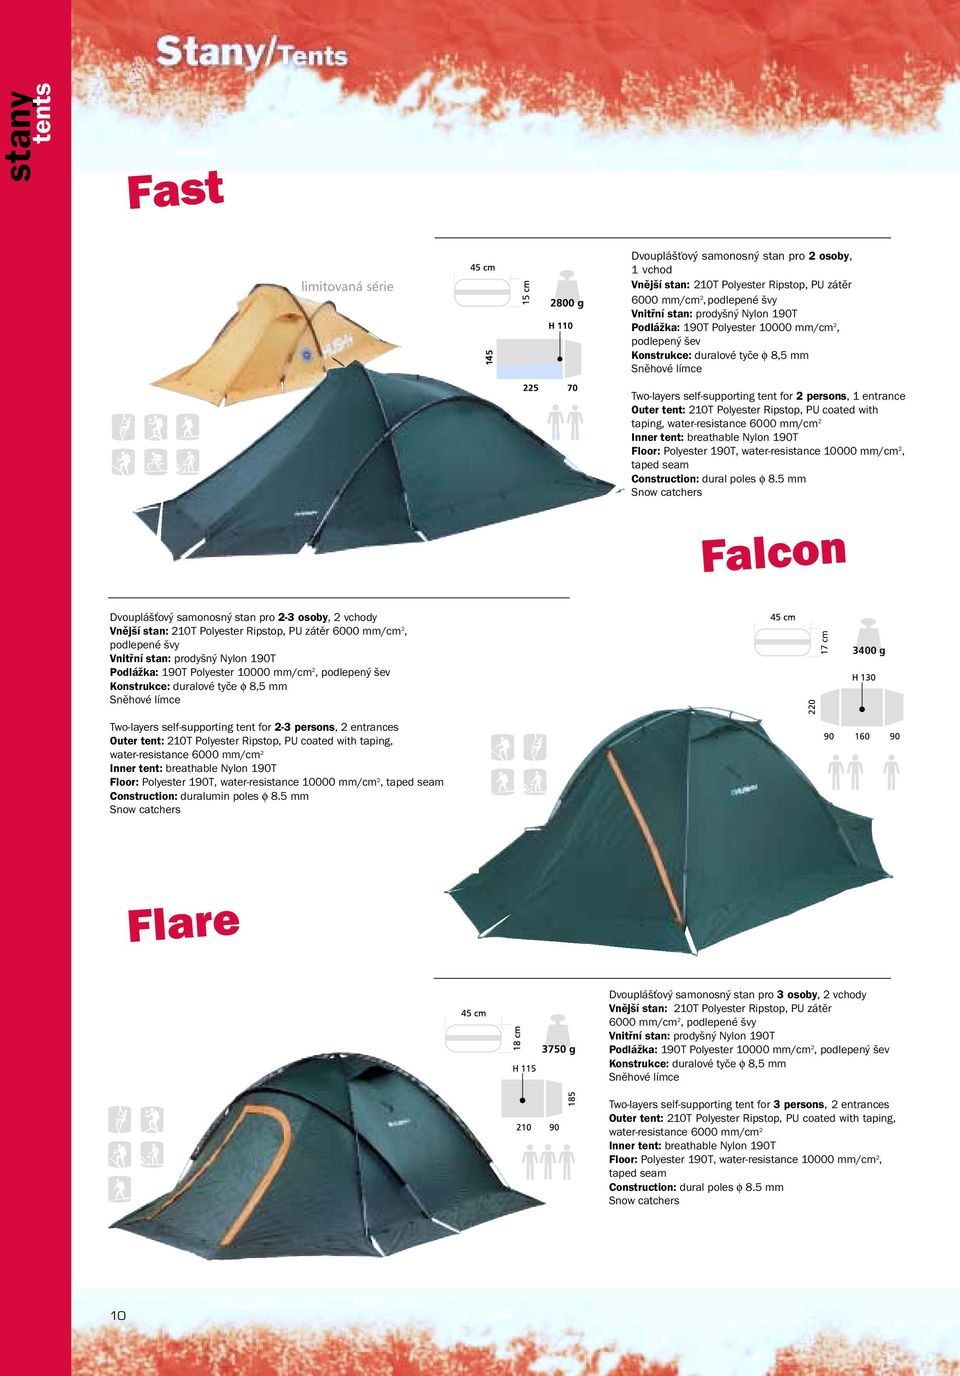 tent for 2-3 persons, Outer tent: 210T Polyester Ripstop, PU coated with taping, water-resistance 6000 mm/cm 2 10000 mm/cm 2, Construction: duralumin poles φ 8.